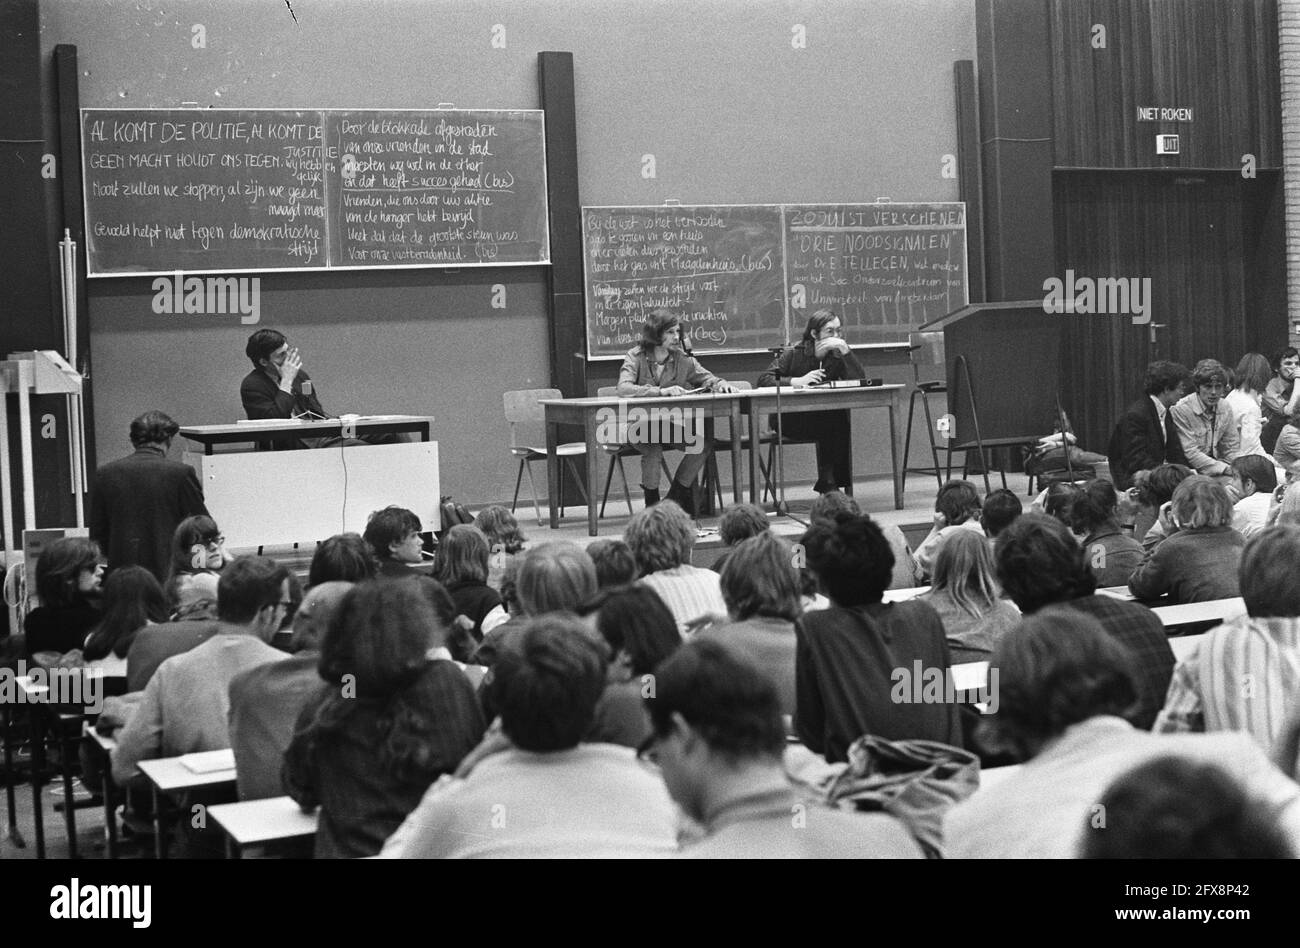 Occupiers of the Maagdenhuis assembled in the Oudemanhuispoort in Amsterdam, to discuss the upcoming trials, June 9, 1969, Occupations, co-determination, students, universities, The Netherlands, 20th century press agency photo, news to remember, documentary, historic photography 1945-1990, visual stories, human history of the Twentieth Century, capturing moments in time Stock Photo